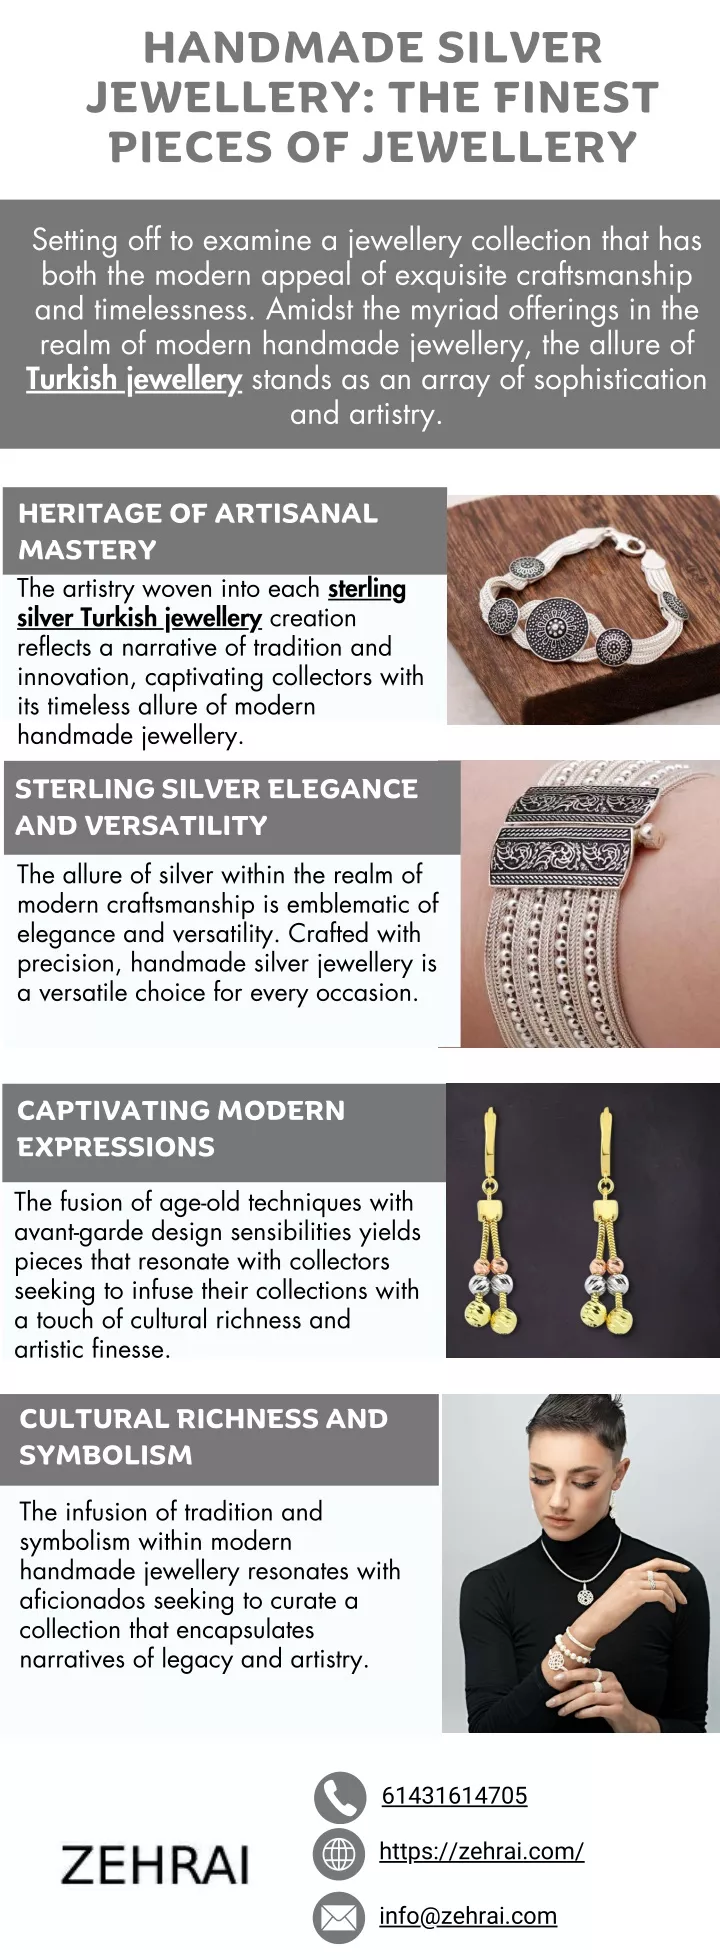 handmade silver jewellery the finest pieces